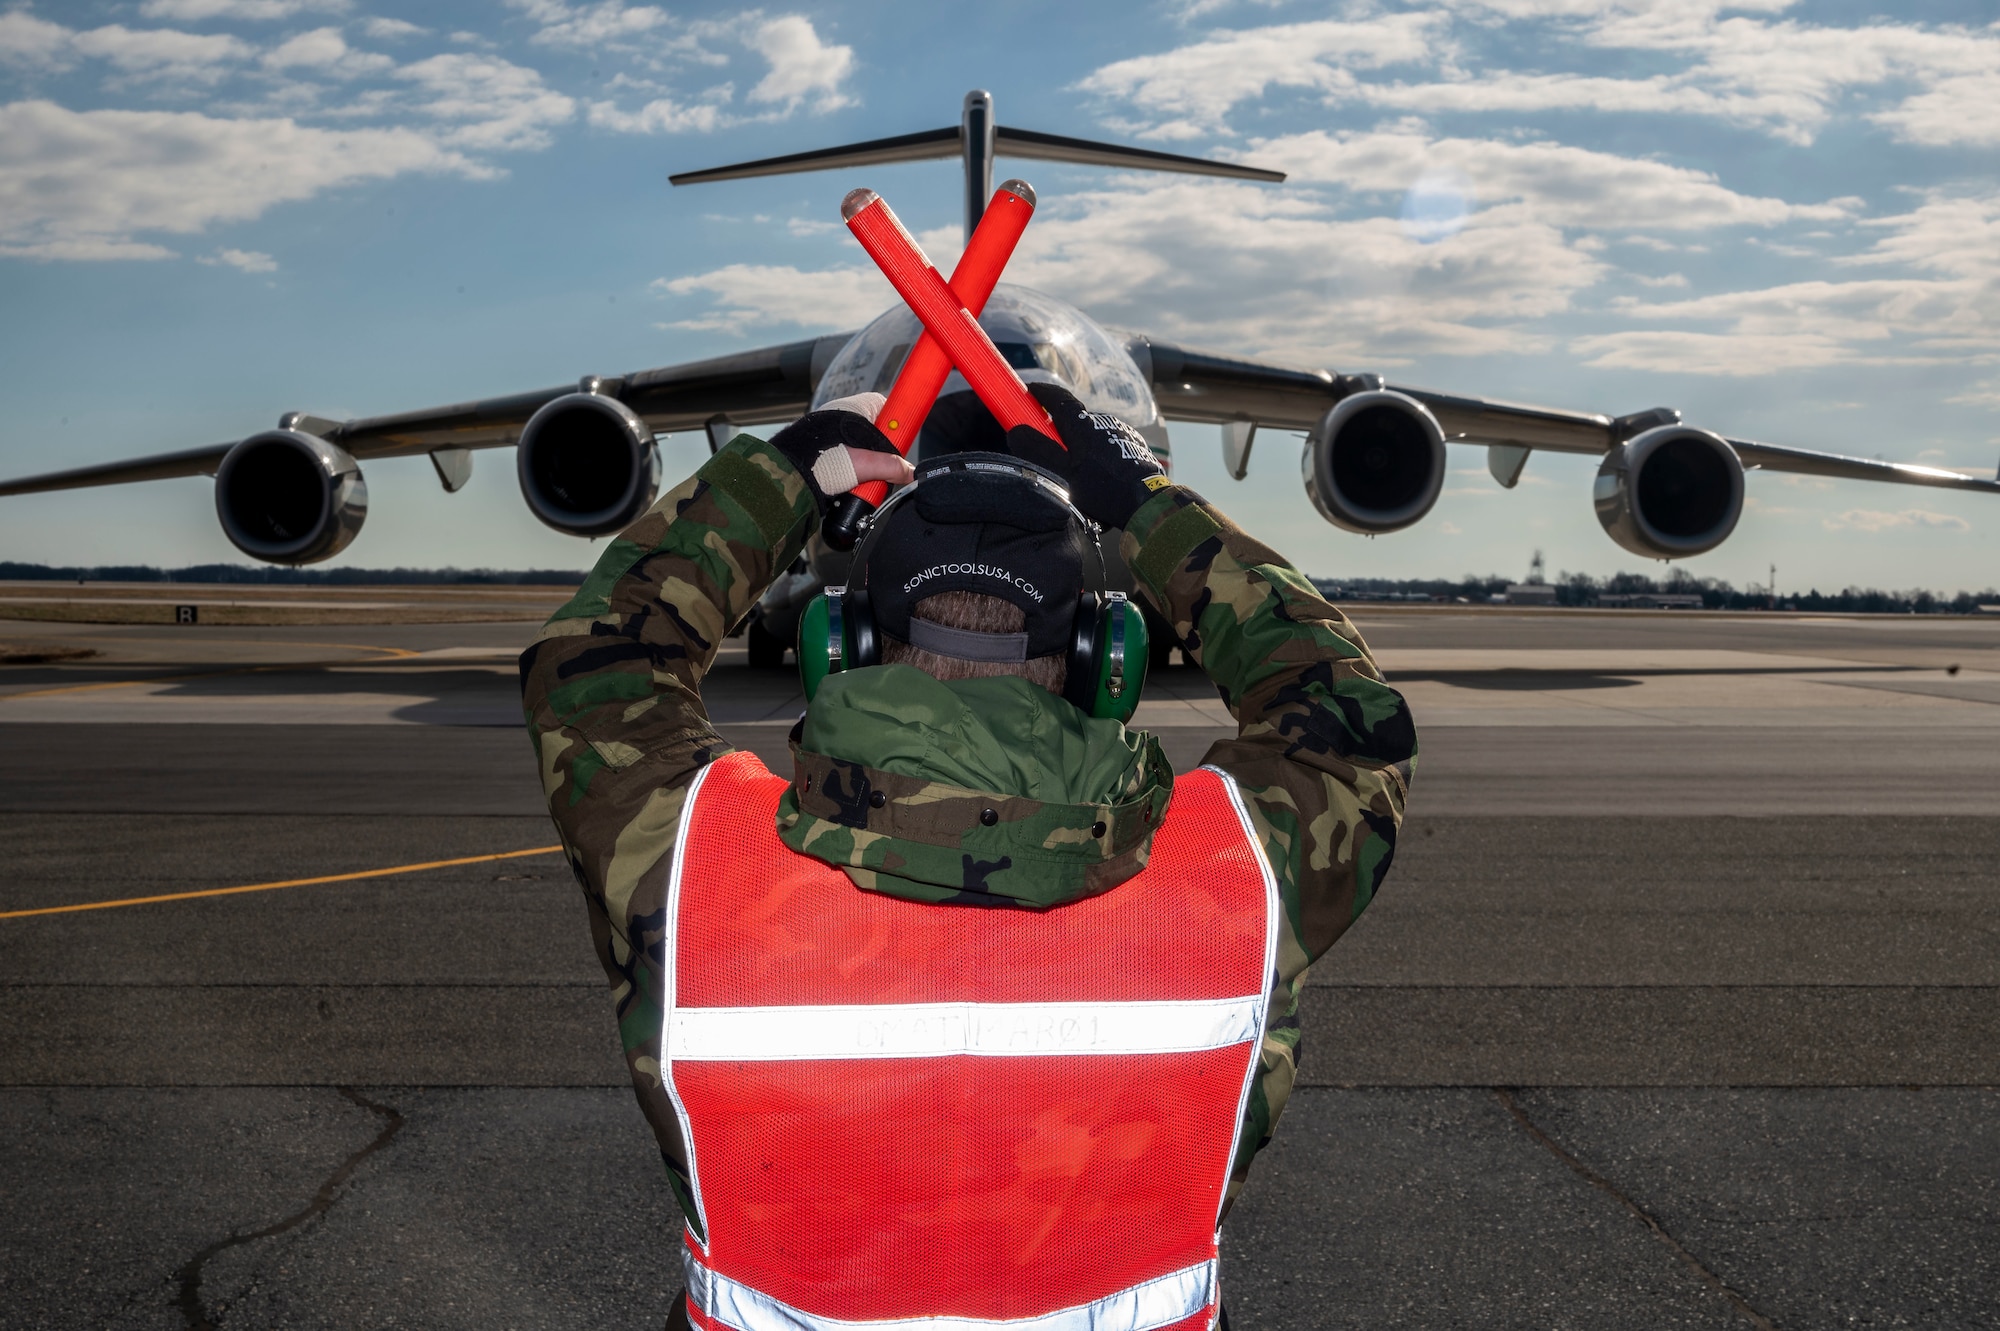 A member of the 436th Aircraft Maintenance Squadron marshals a Kuwait air force C-17 Globemaster III at Dover Air Force Base, Delaware, Jan. 22, 2021. This year, the U.S. and Kuwait celebrate the 30th anniversary of Operation Desert Storm, which serves as a key milestone in U.S.-Kuwaiti cooperation and helped cement Kuwait’s role as a regional leader in the promotion of peace and security. Due to its strategic geographic location, Dover AFB supports approximately $3.5 billion worth of foreign military sales operations annually. (U.S. Air Force photo by Senior Airman Christopher Quail)